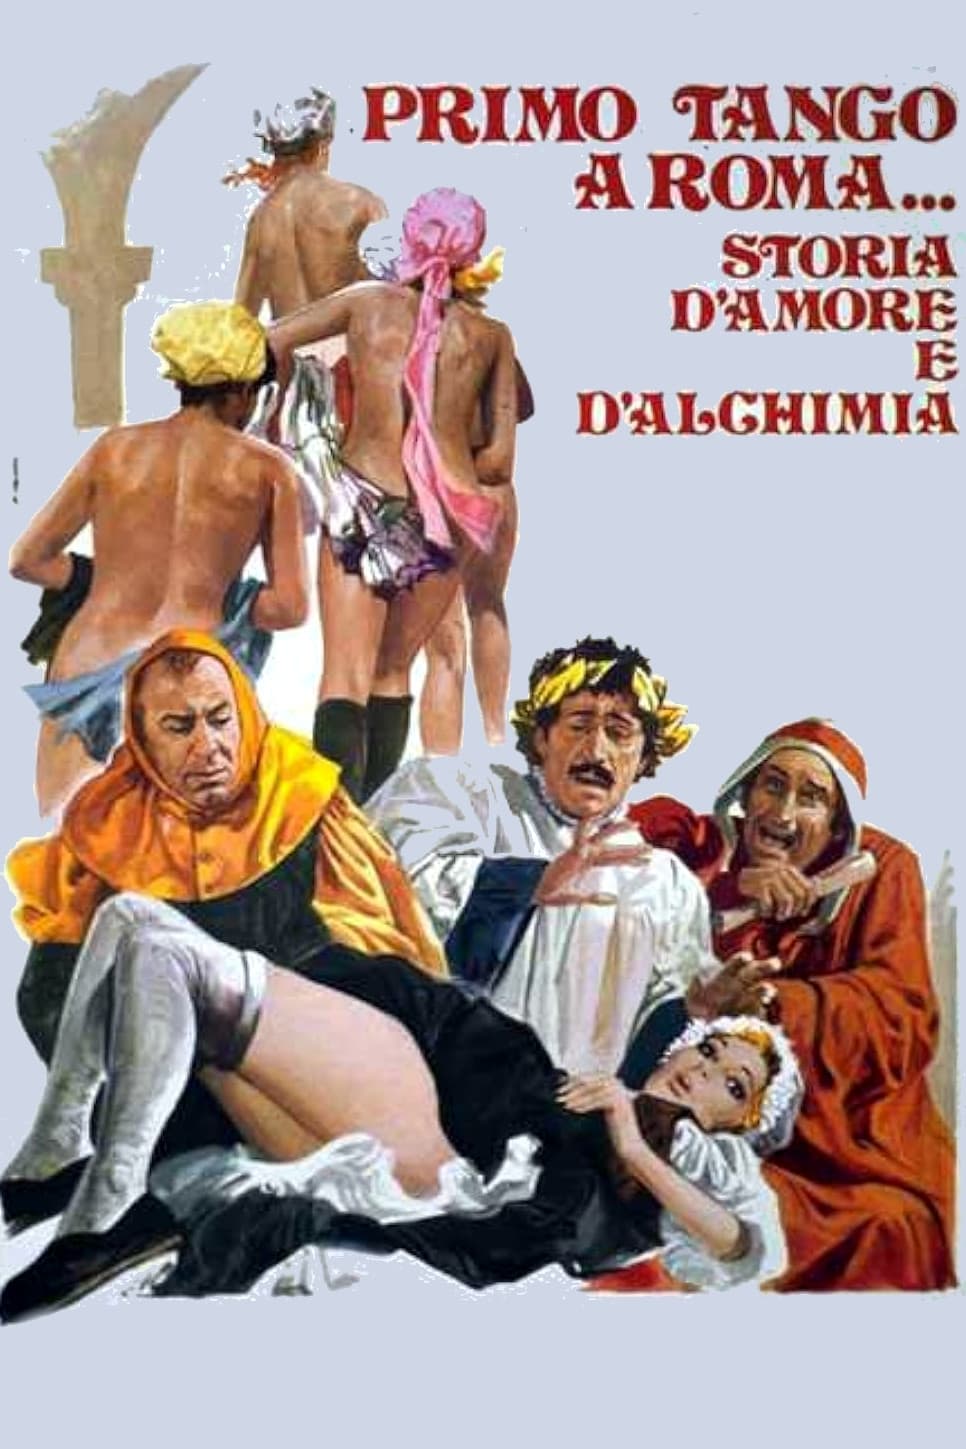 First Tango in Rome: Romance and Alchemy (1973)